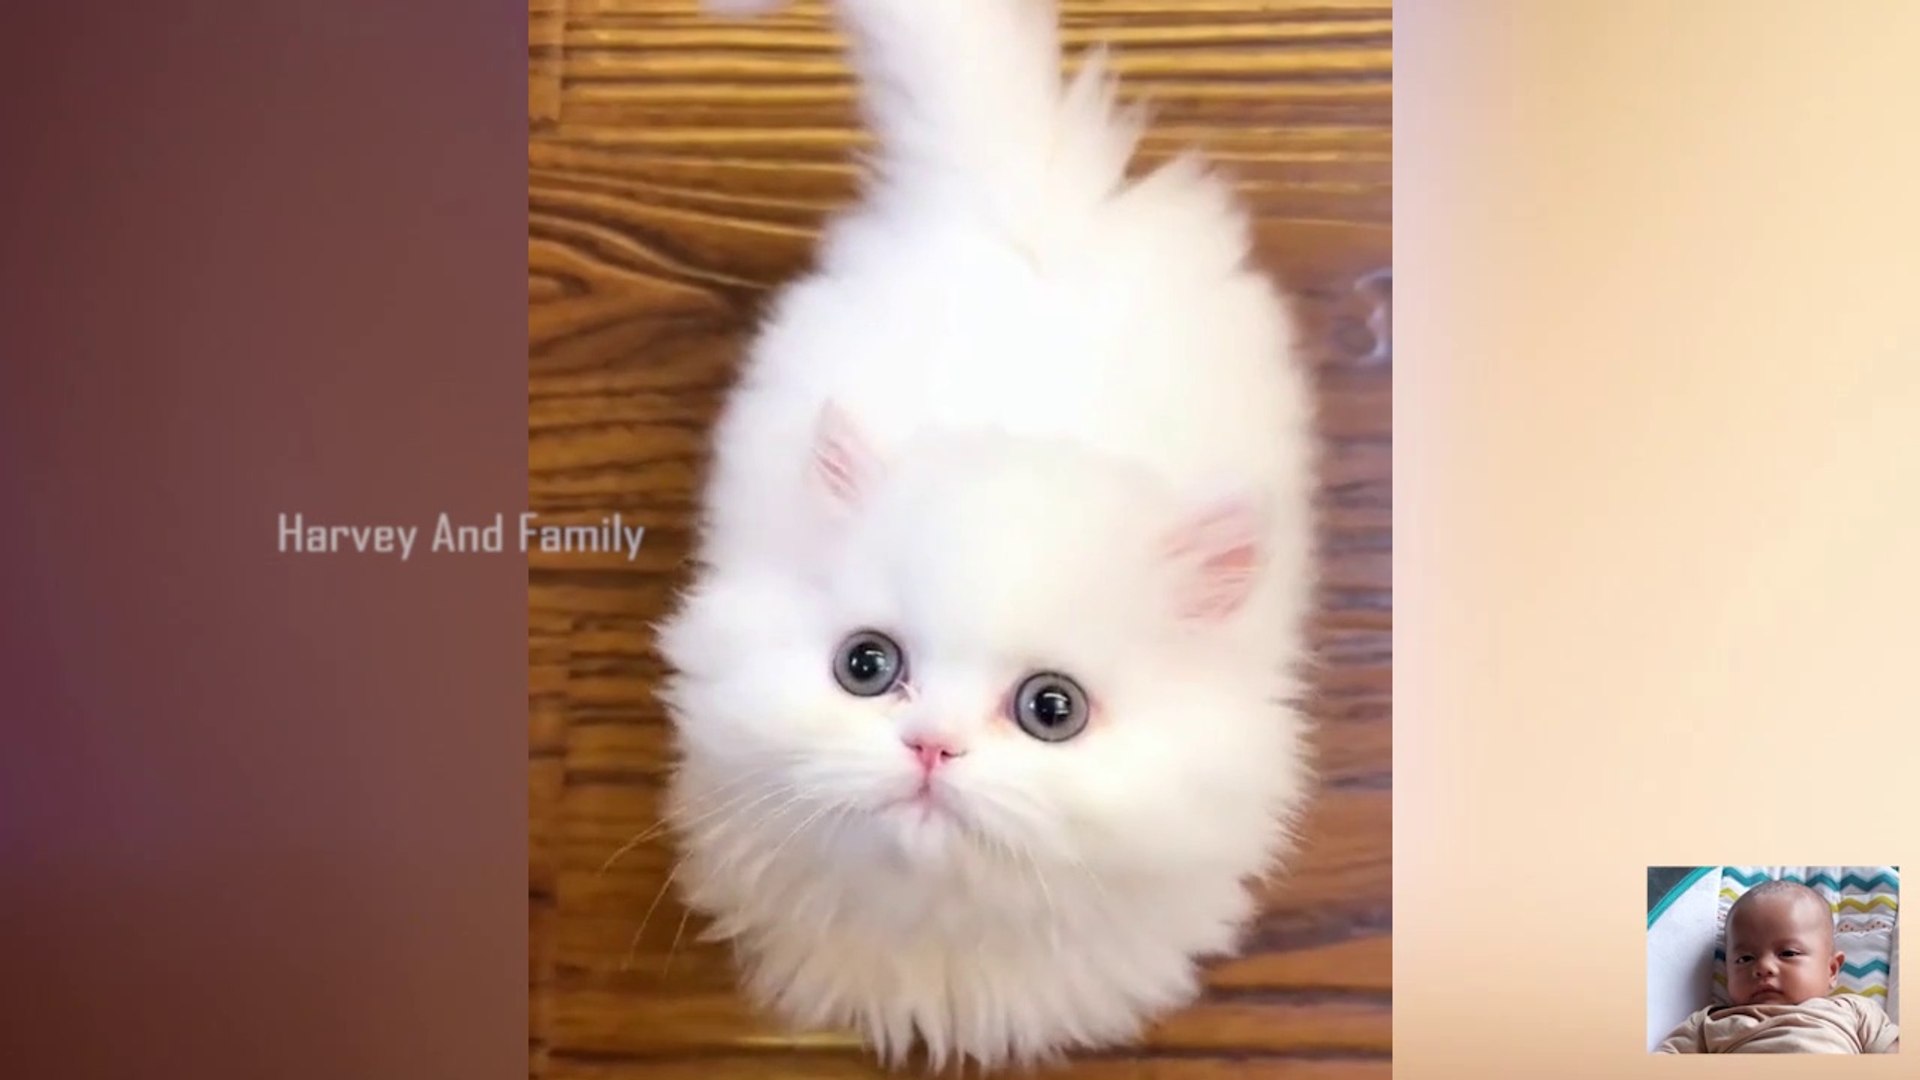 Baby Cats - Cute and Funny Cat Videos Compilation #6 - video